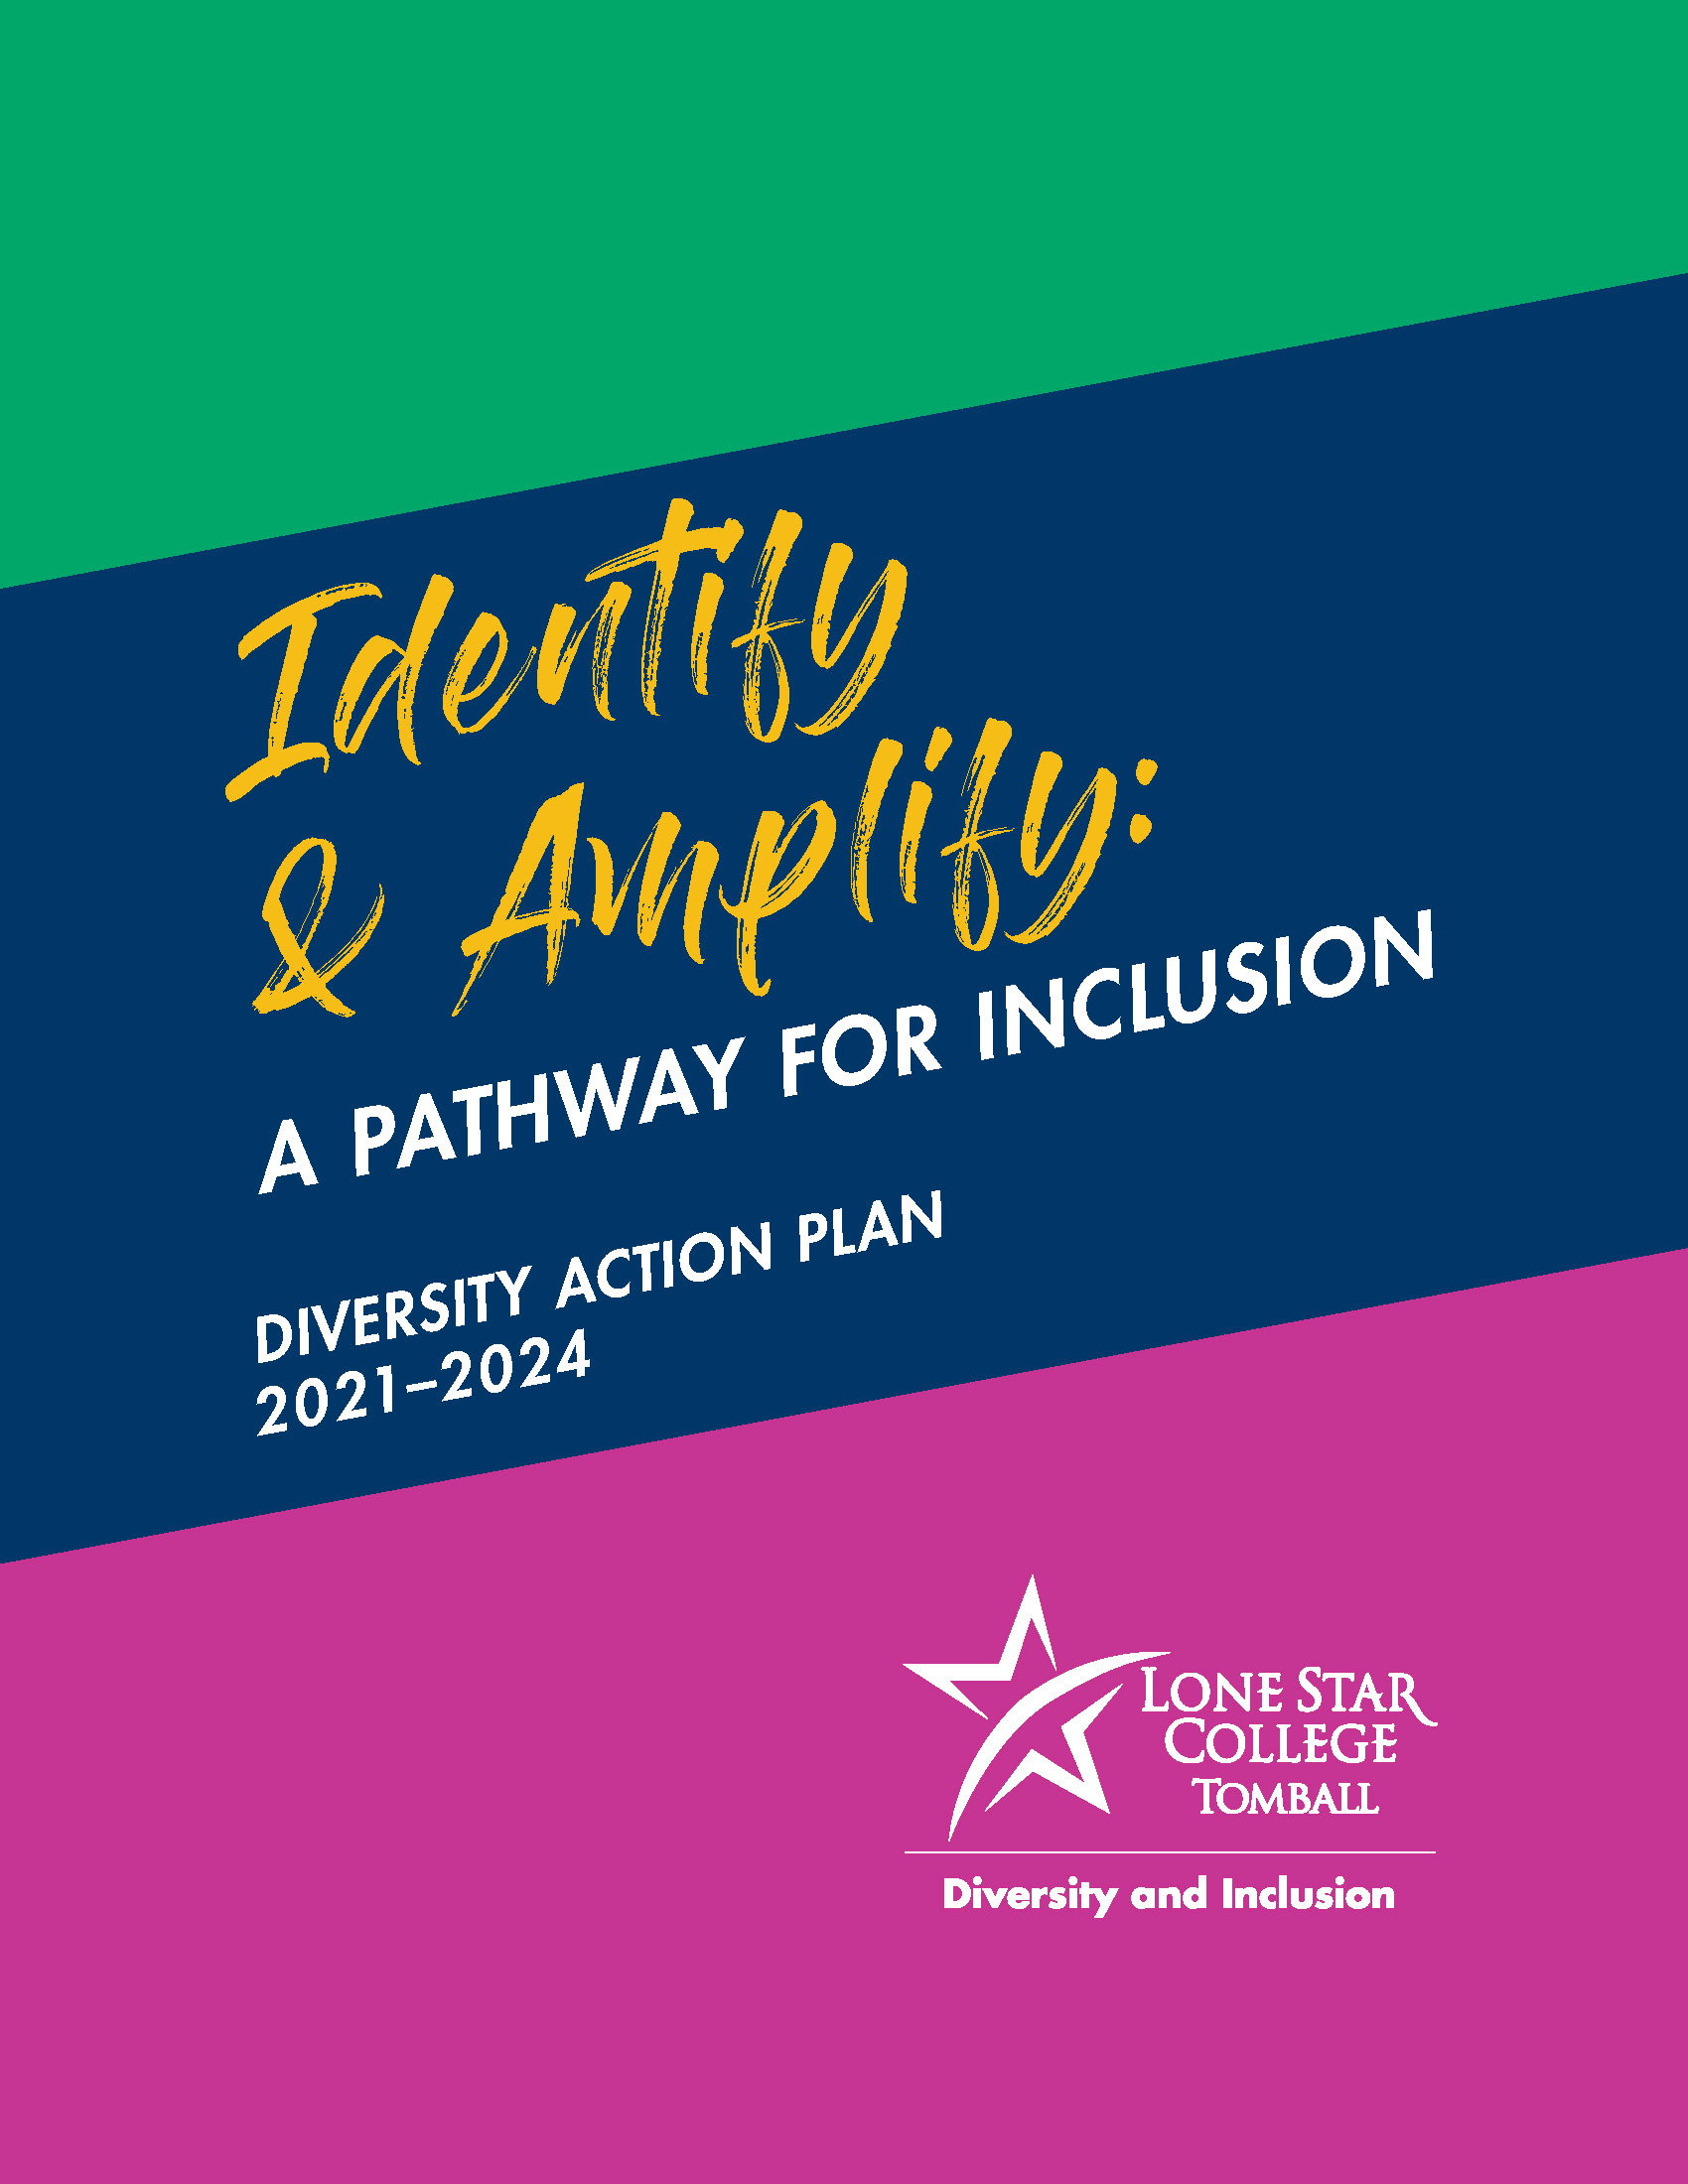 Identify & Amplify: A Pathway for Inclusion -- Diversity Action Plan 2021-2024